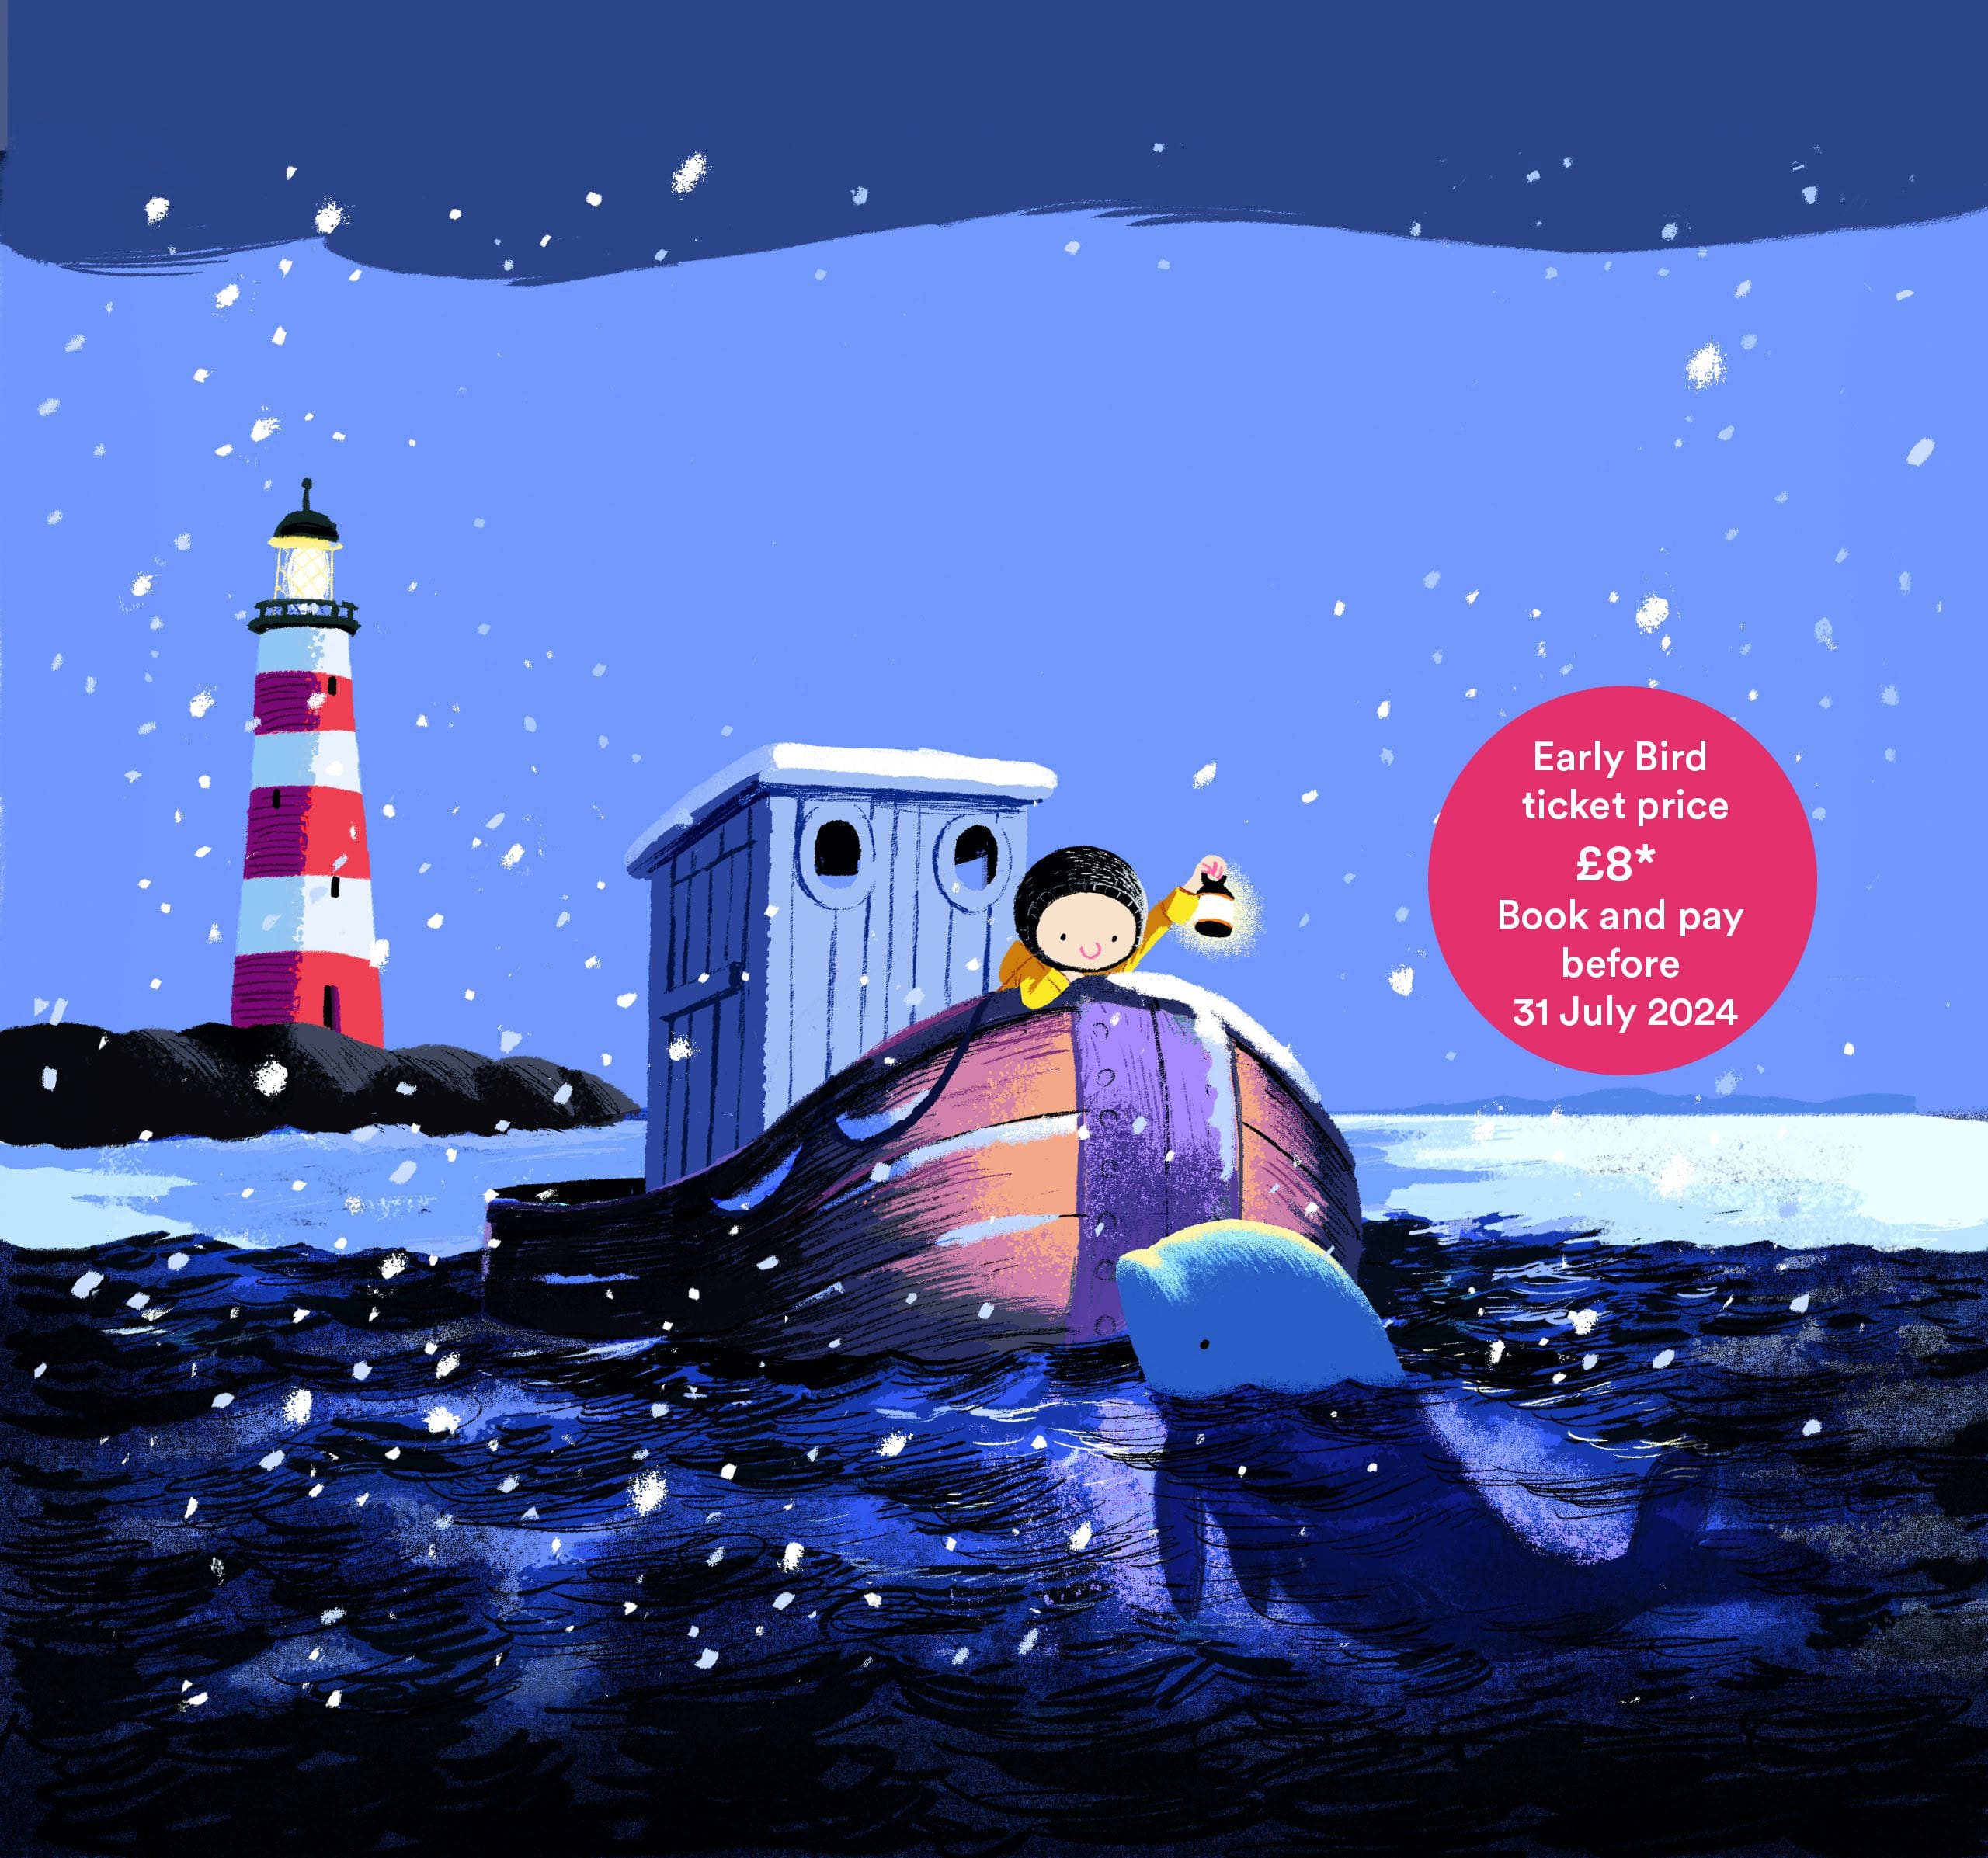 An illustration of a small child at the end of a wooden boat, holding a lamp in the darkness, whilst a whale sits next to the boat. A snowy scene and a lighthouse sit in the background,